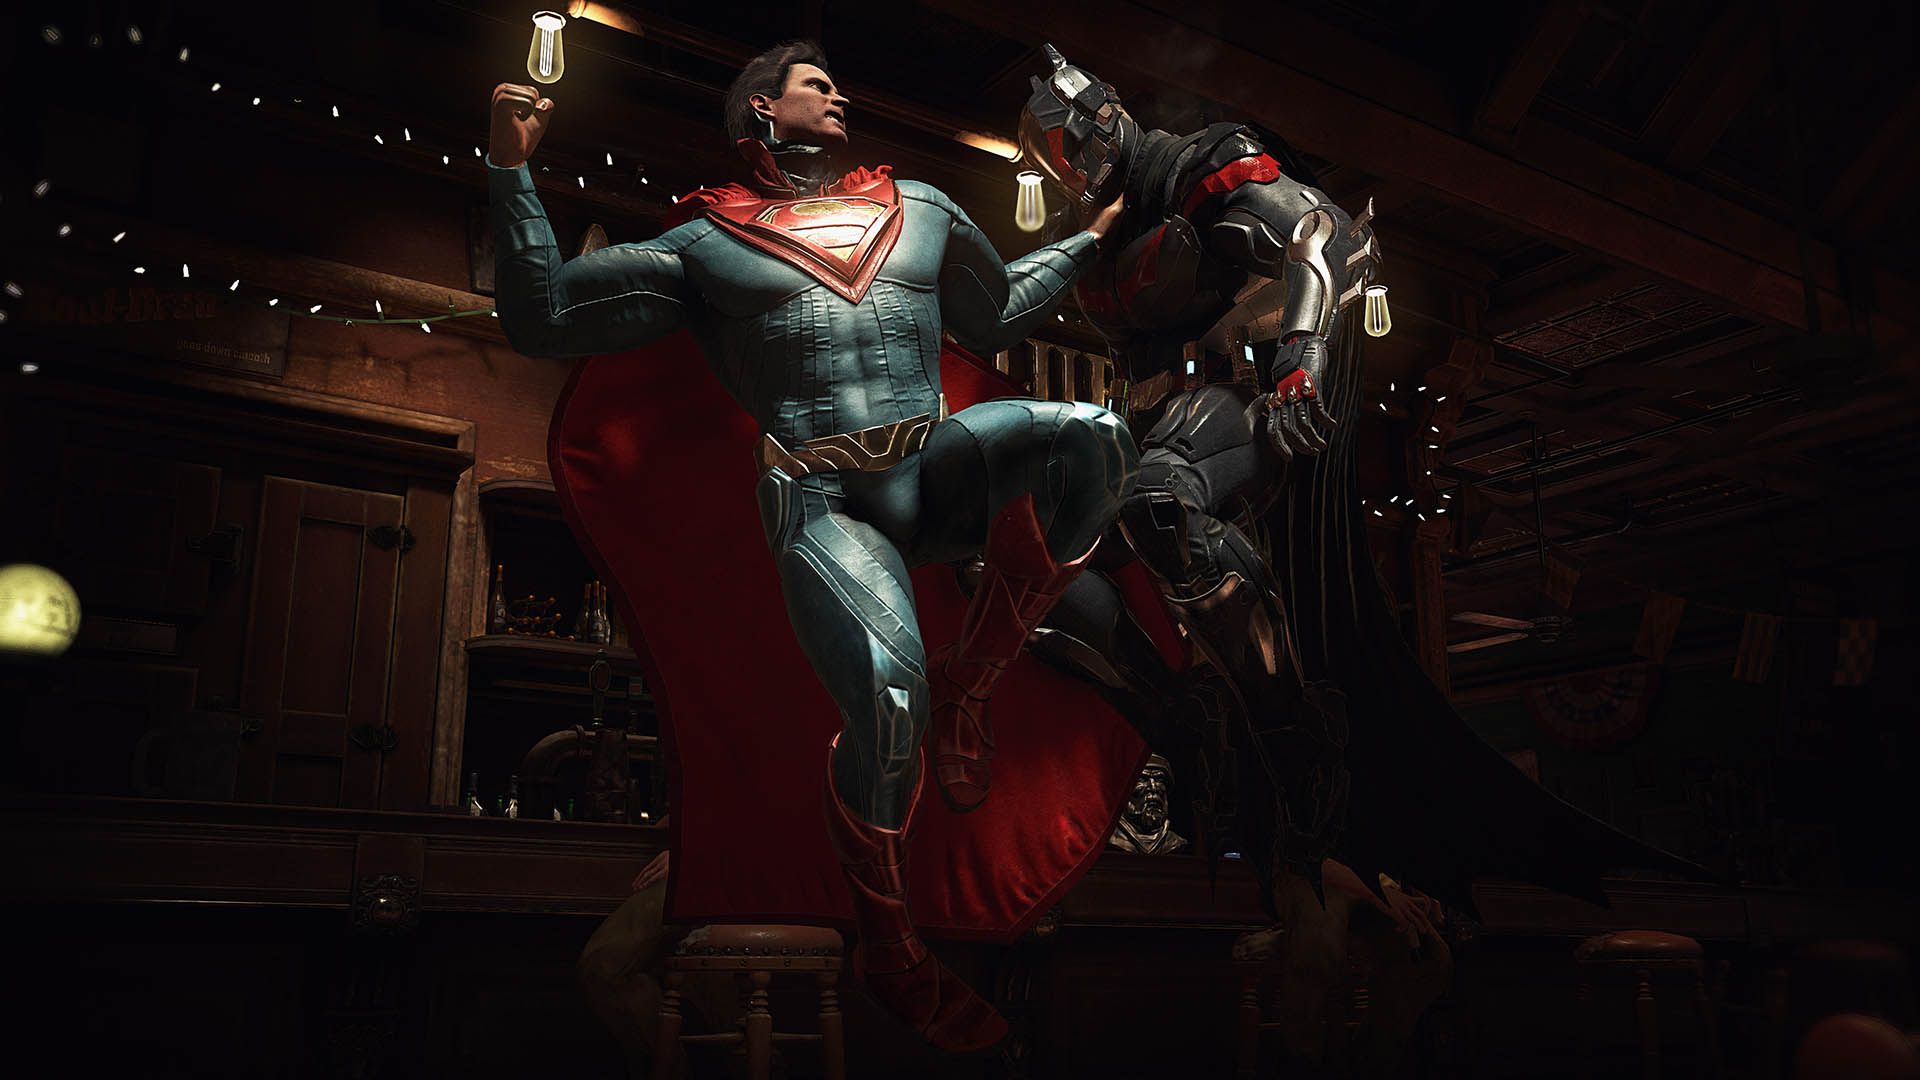 PlayStation Store Has August Savings On Injustice BioShock And More